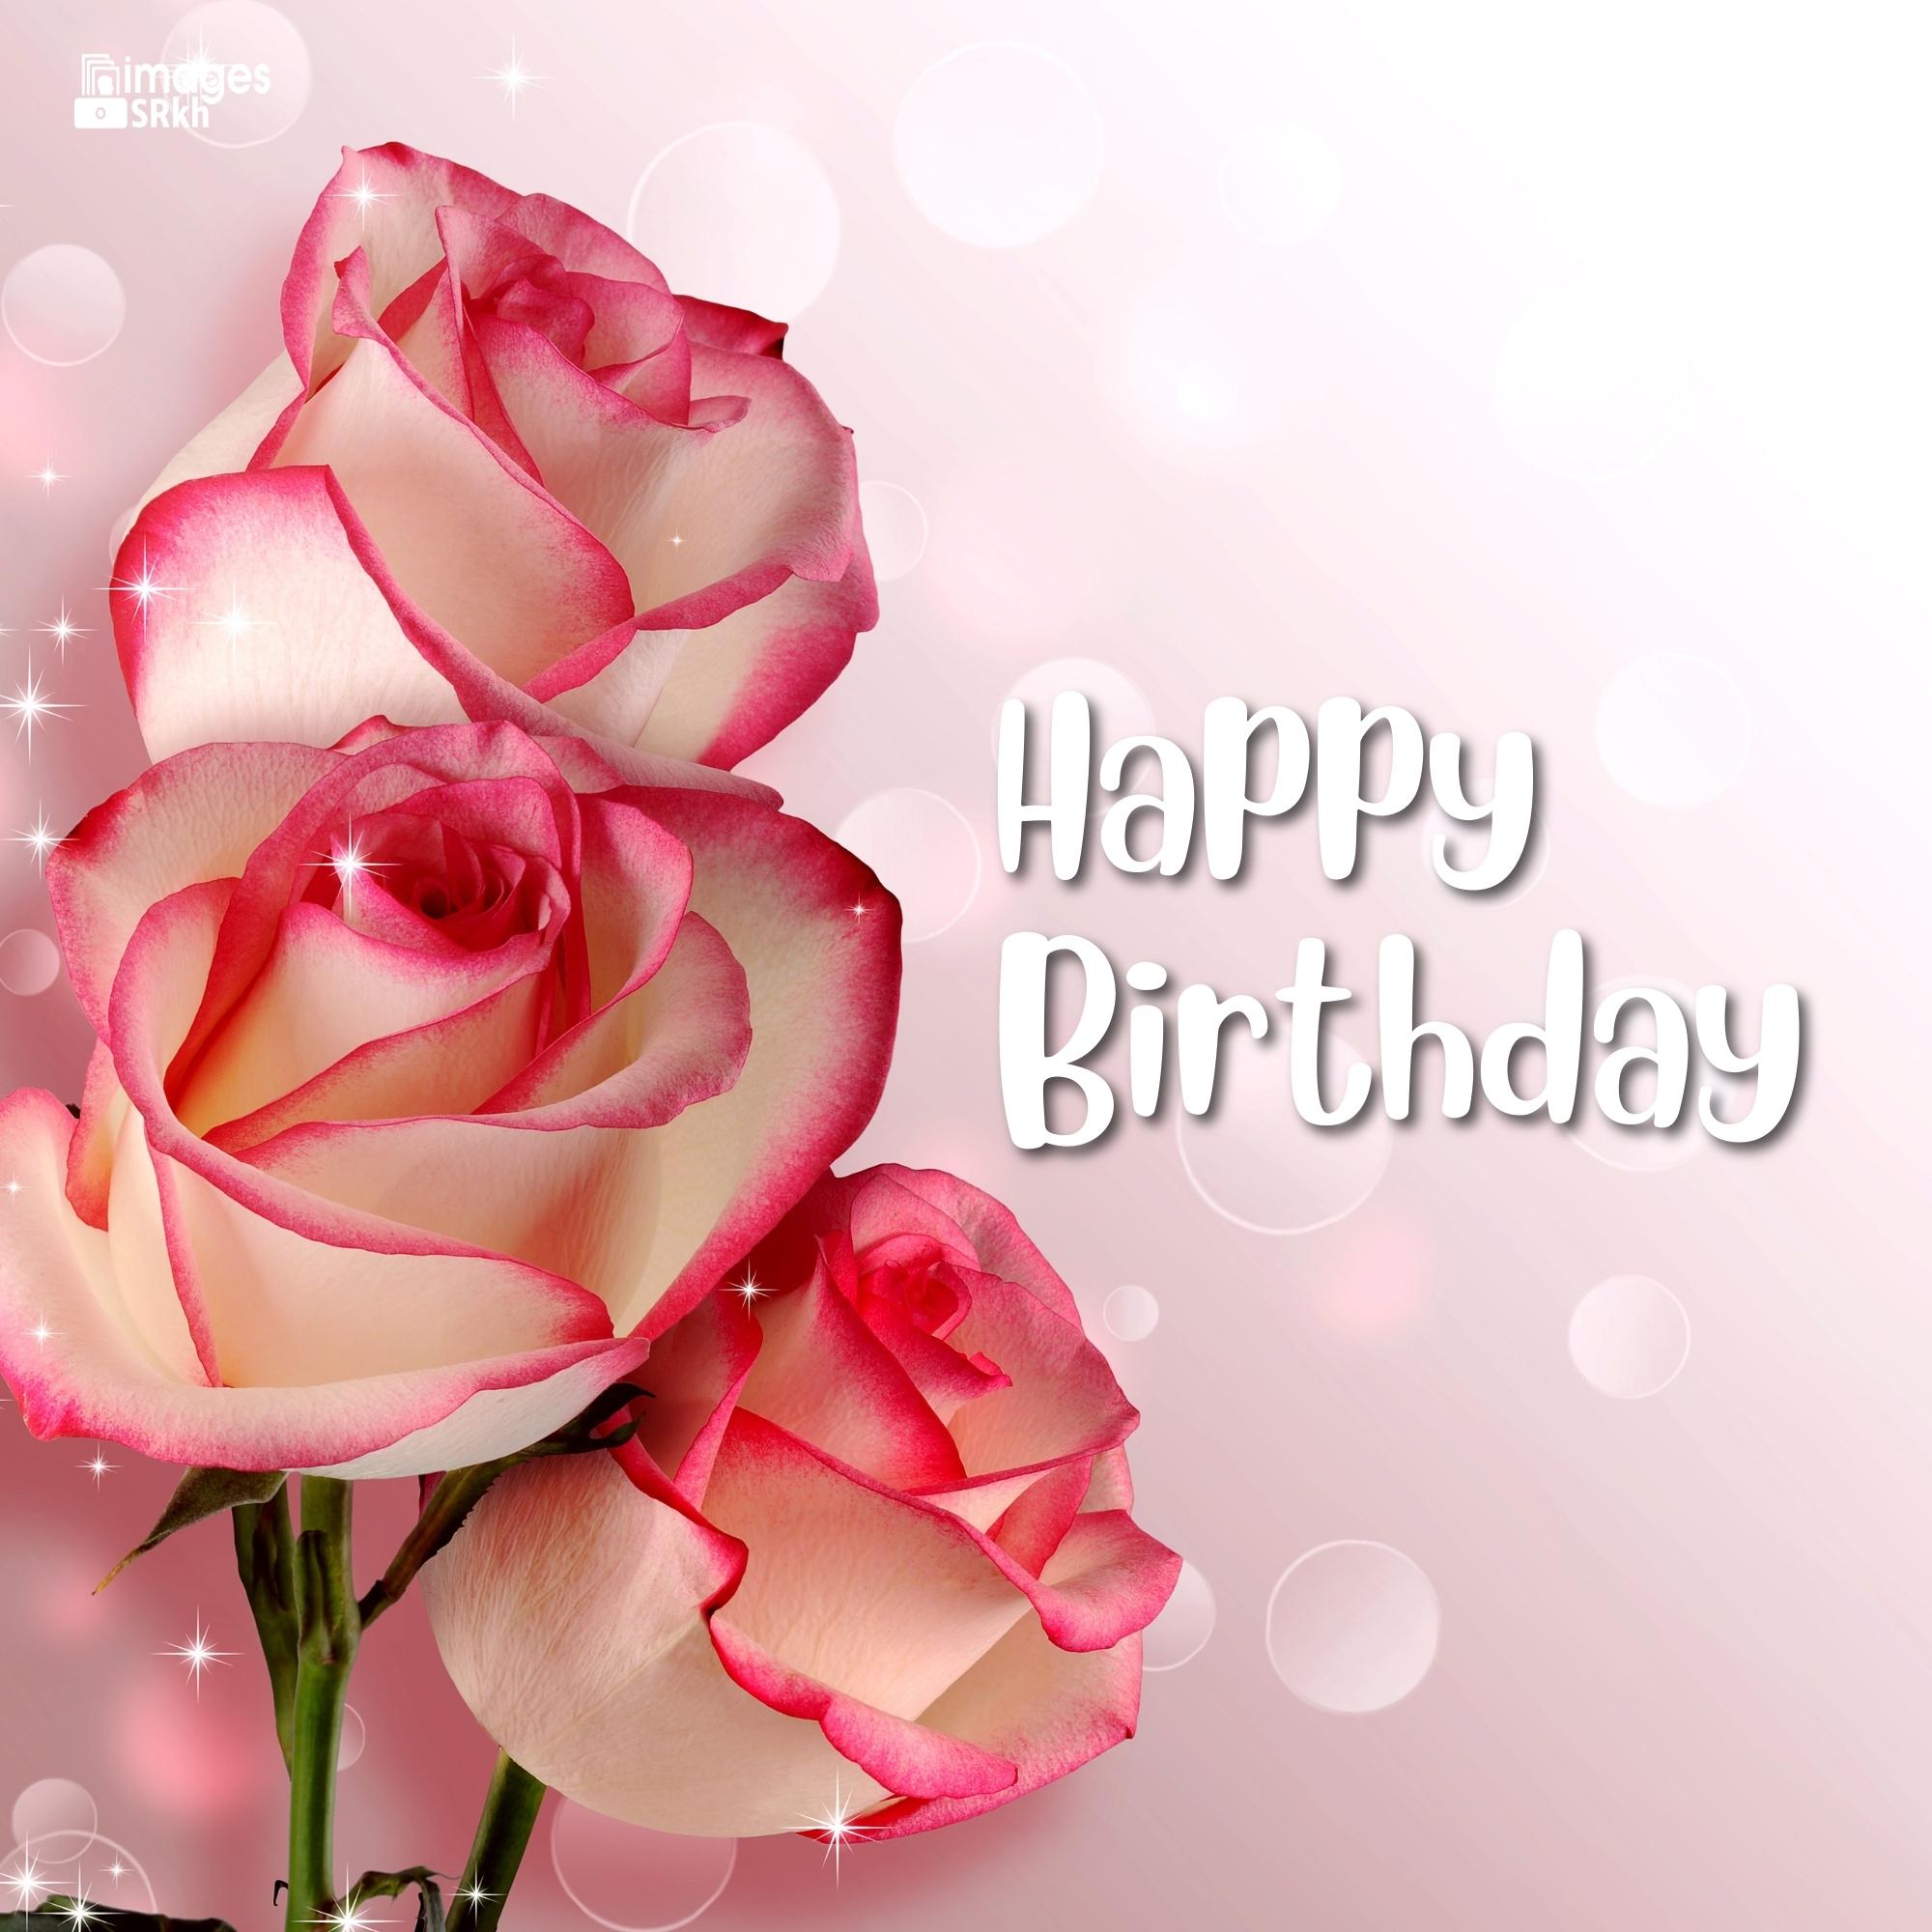 Beautiful Happy Birthday Images full hd download